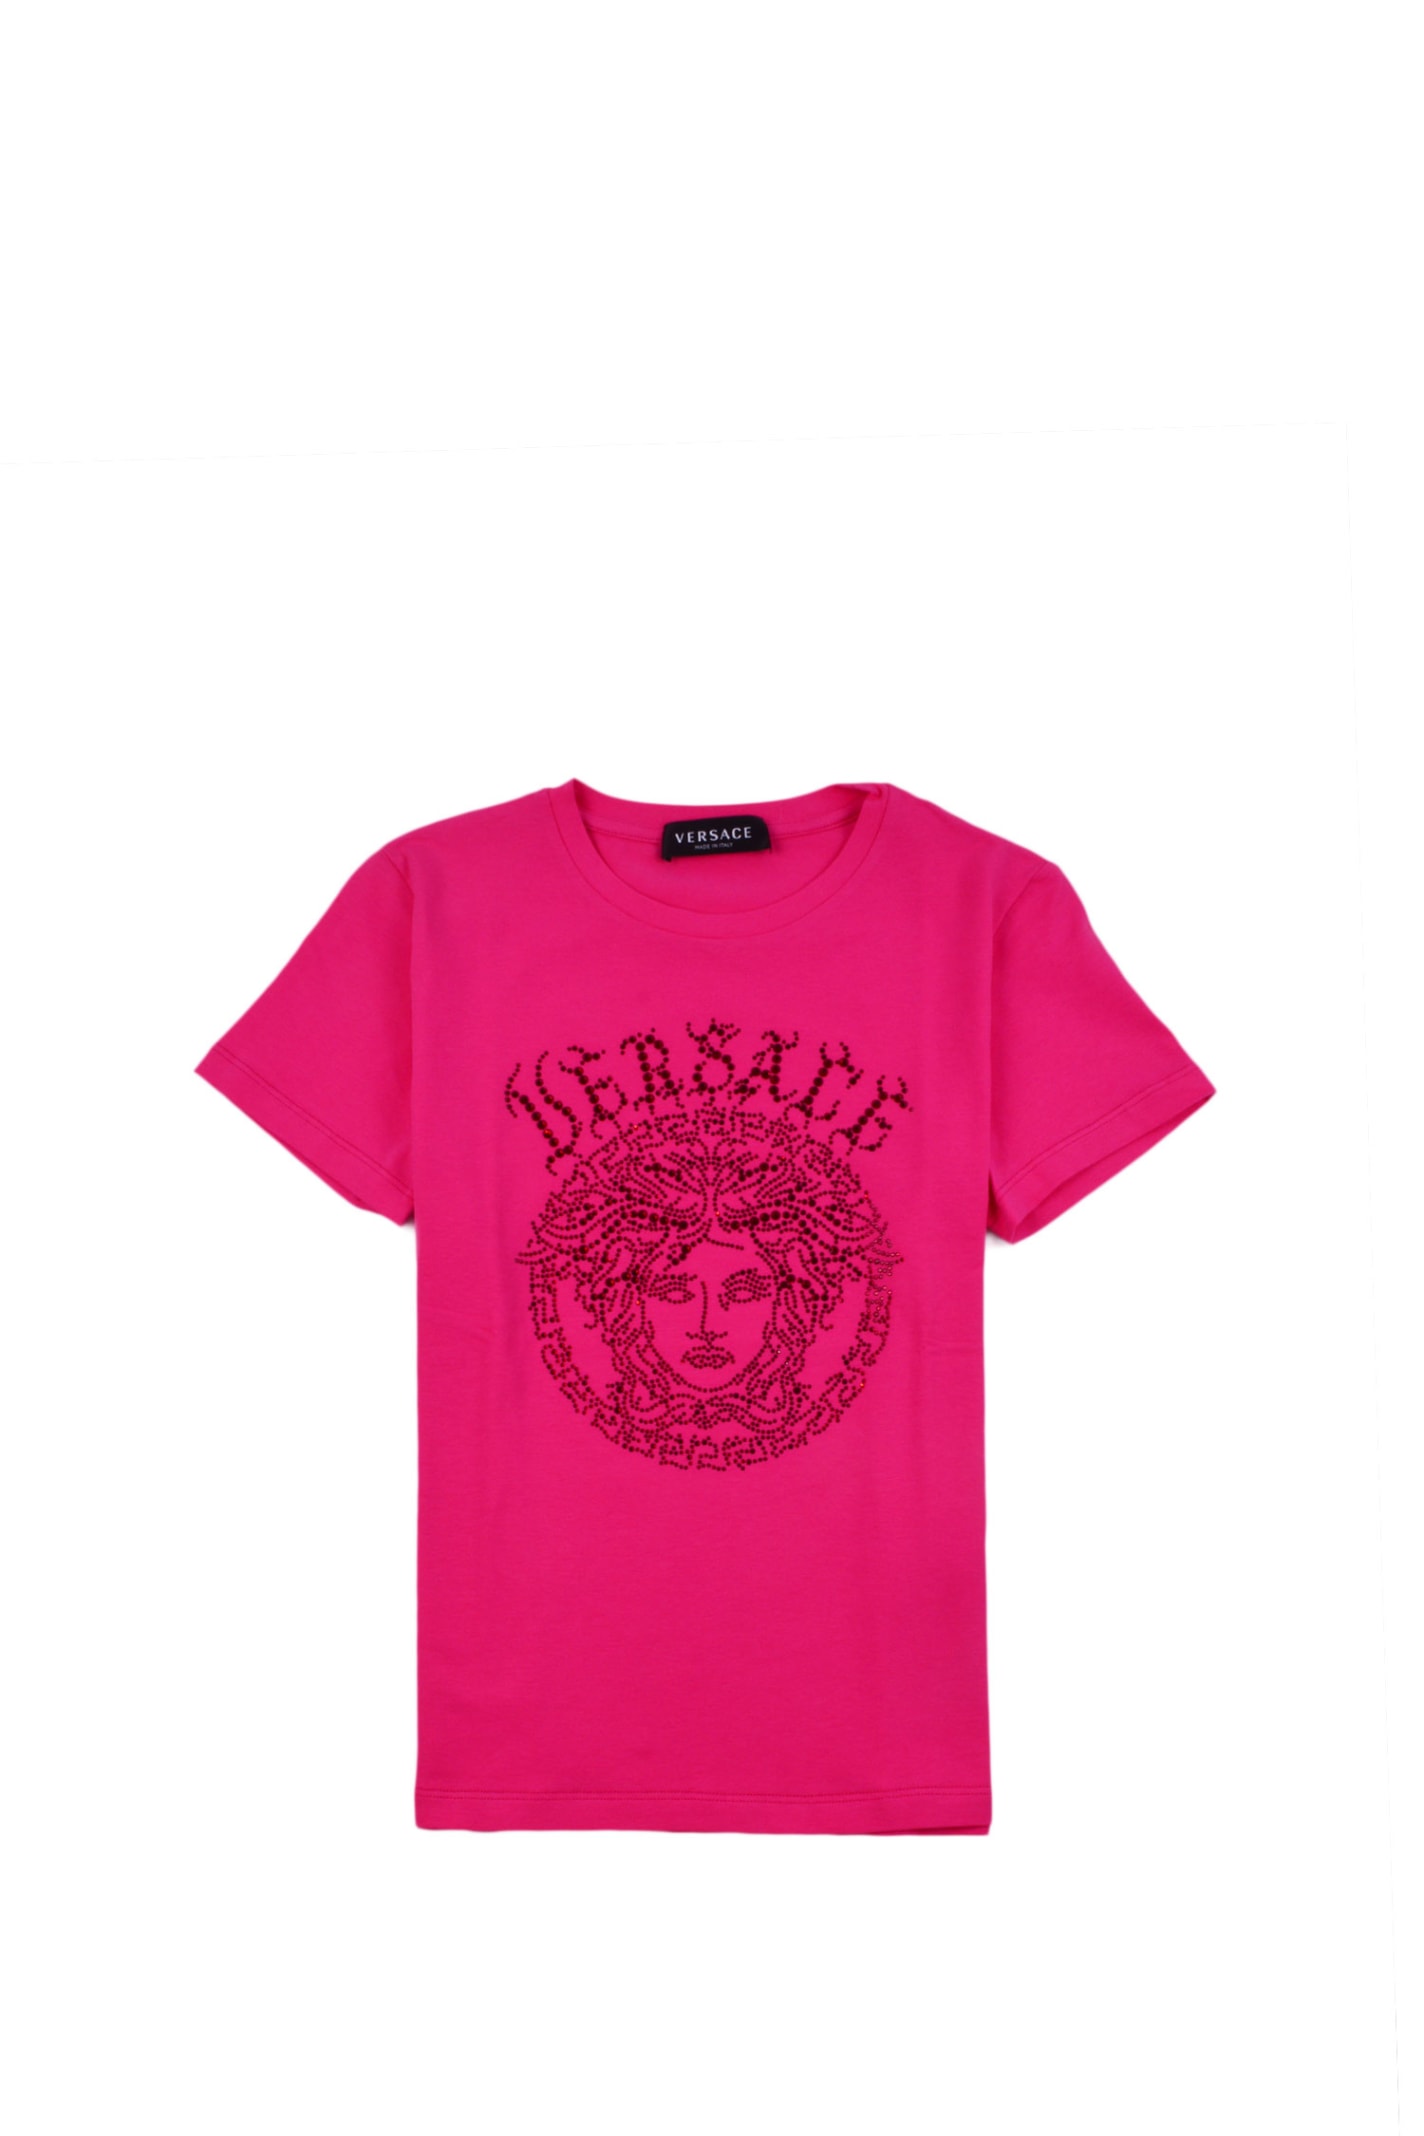 VERSACE T-SHIRT WITH MEDUSA CRYSTALS